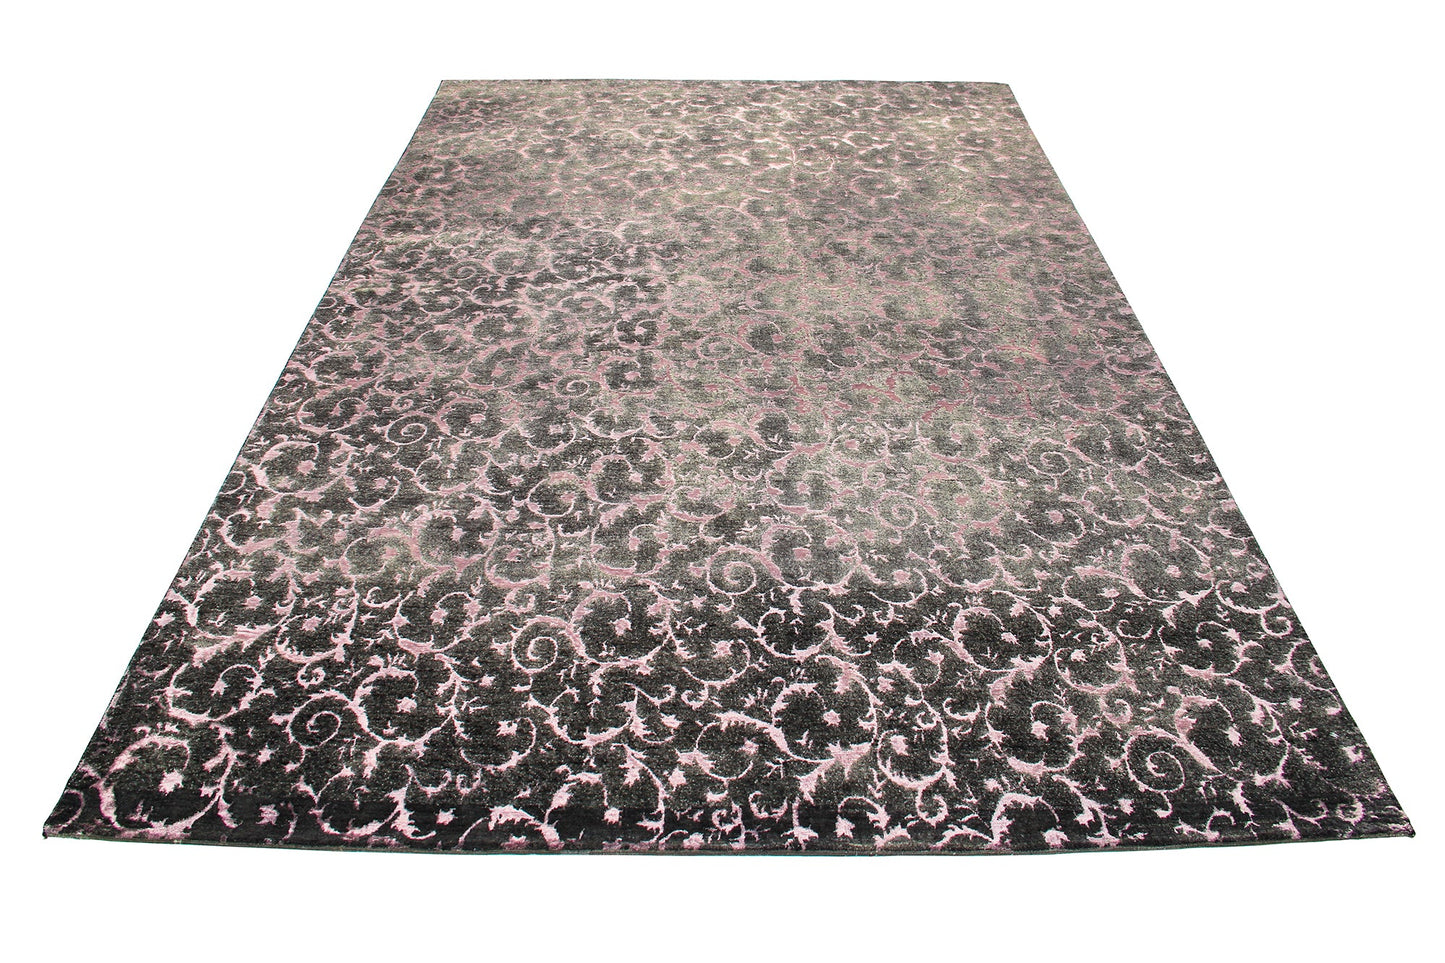 Indian Modern  Carpet With Allover Acanthus and Floral Pattern product image #27556264870058